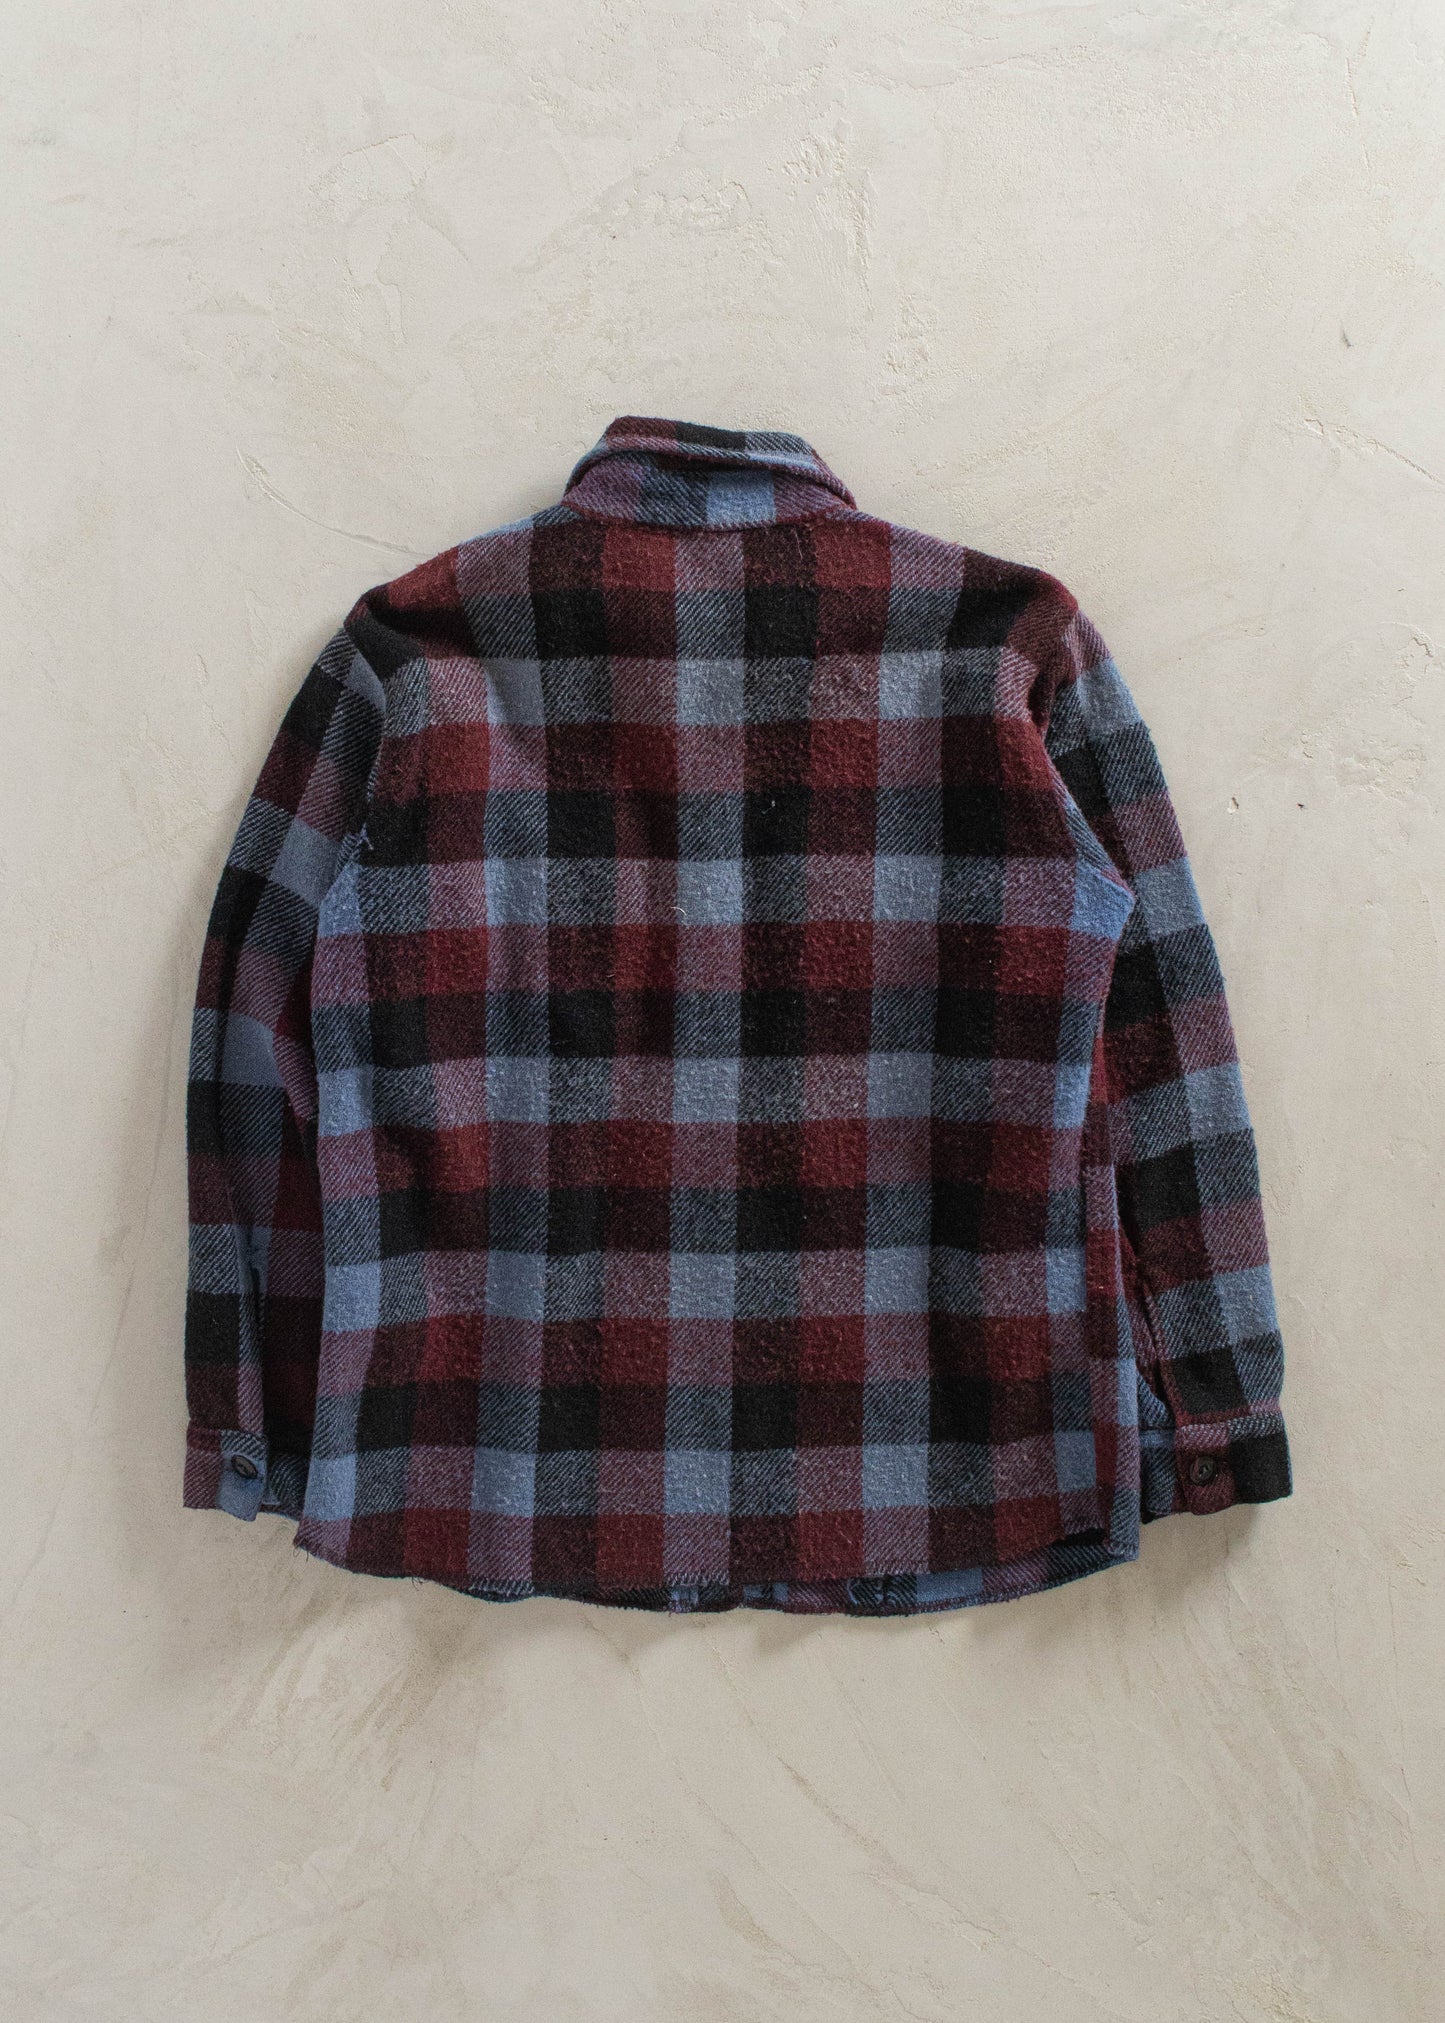 1980s Frostproof Wool Flannel Button Up Shirt Size XS/S